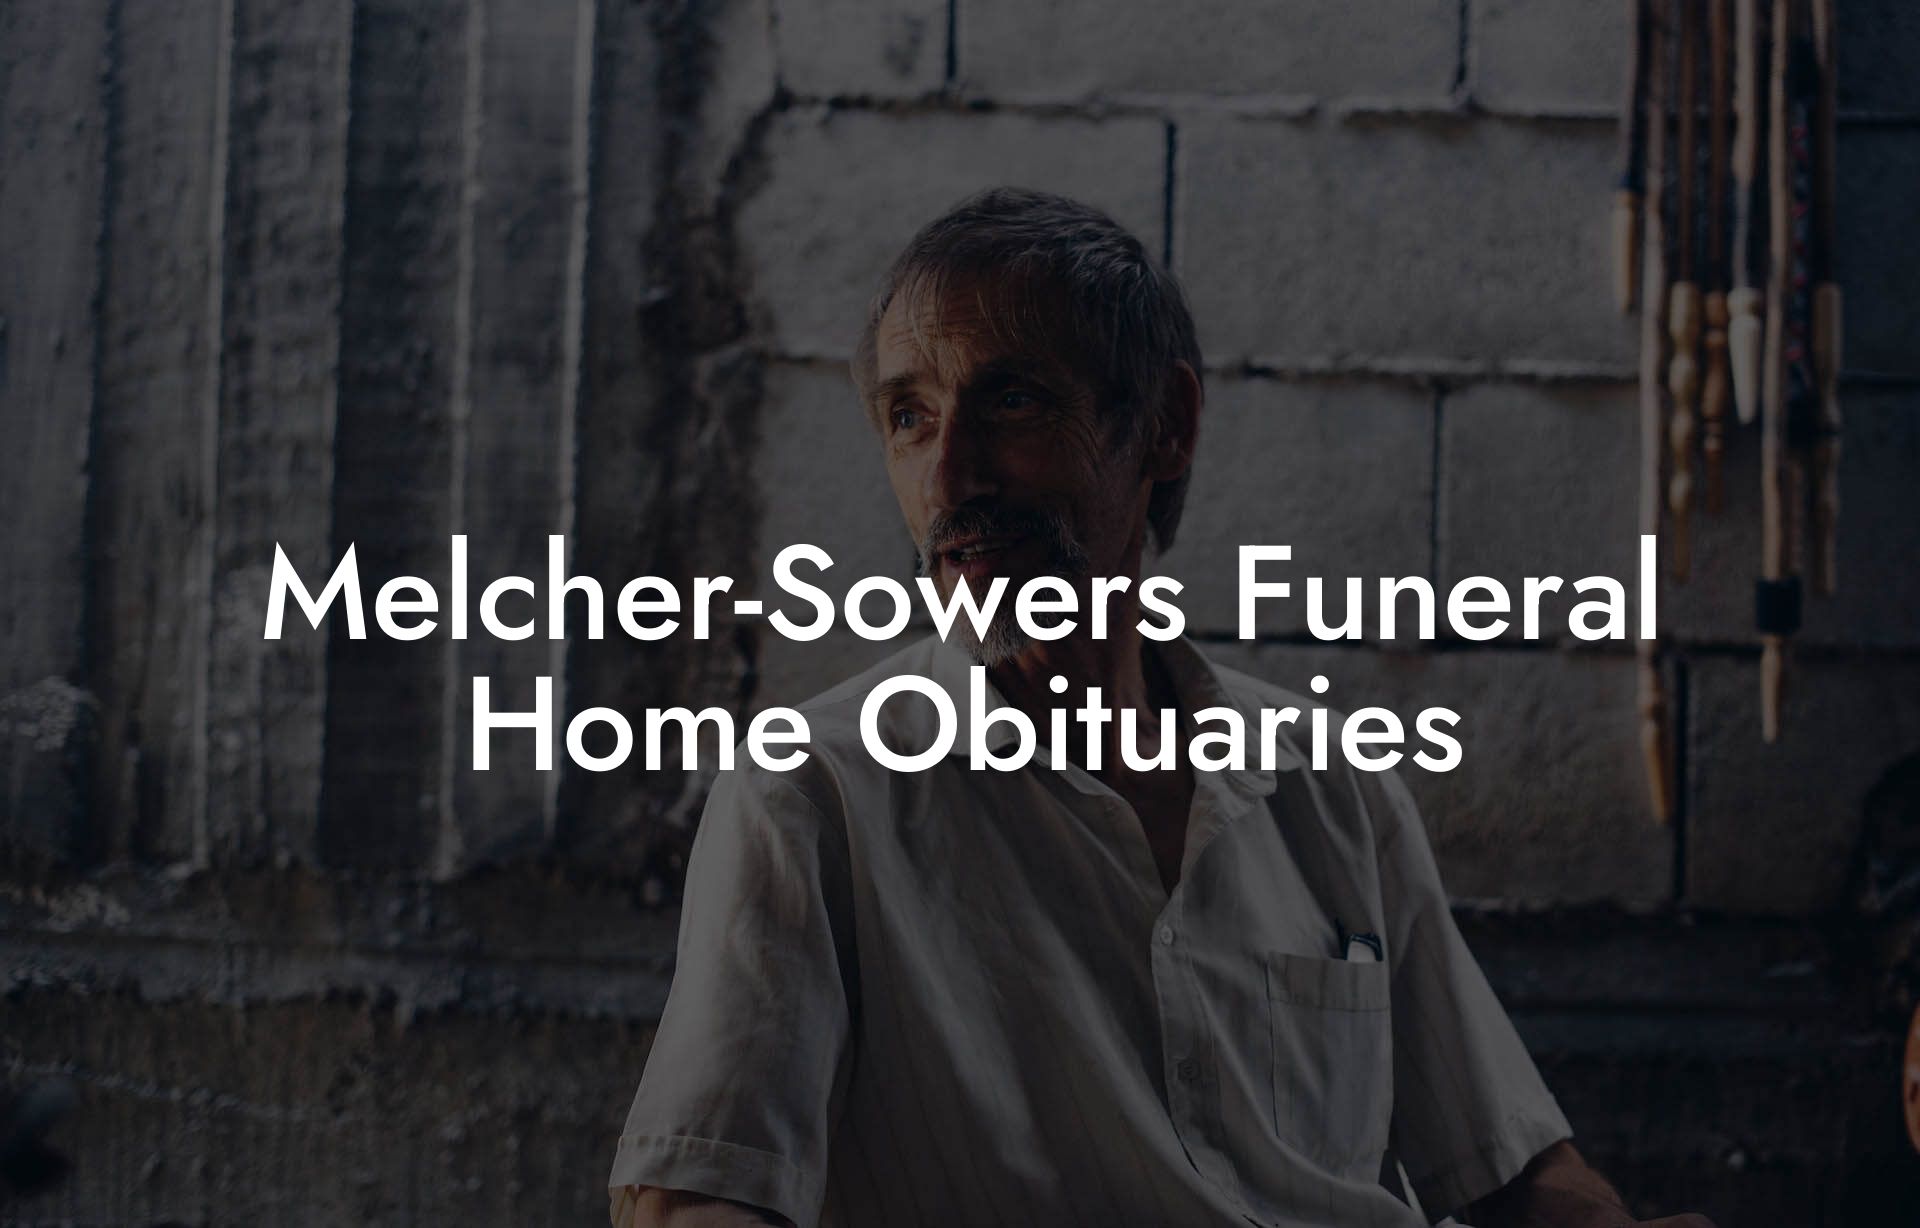 Melcher-Sowers Funeral Home Obituaries